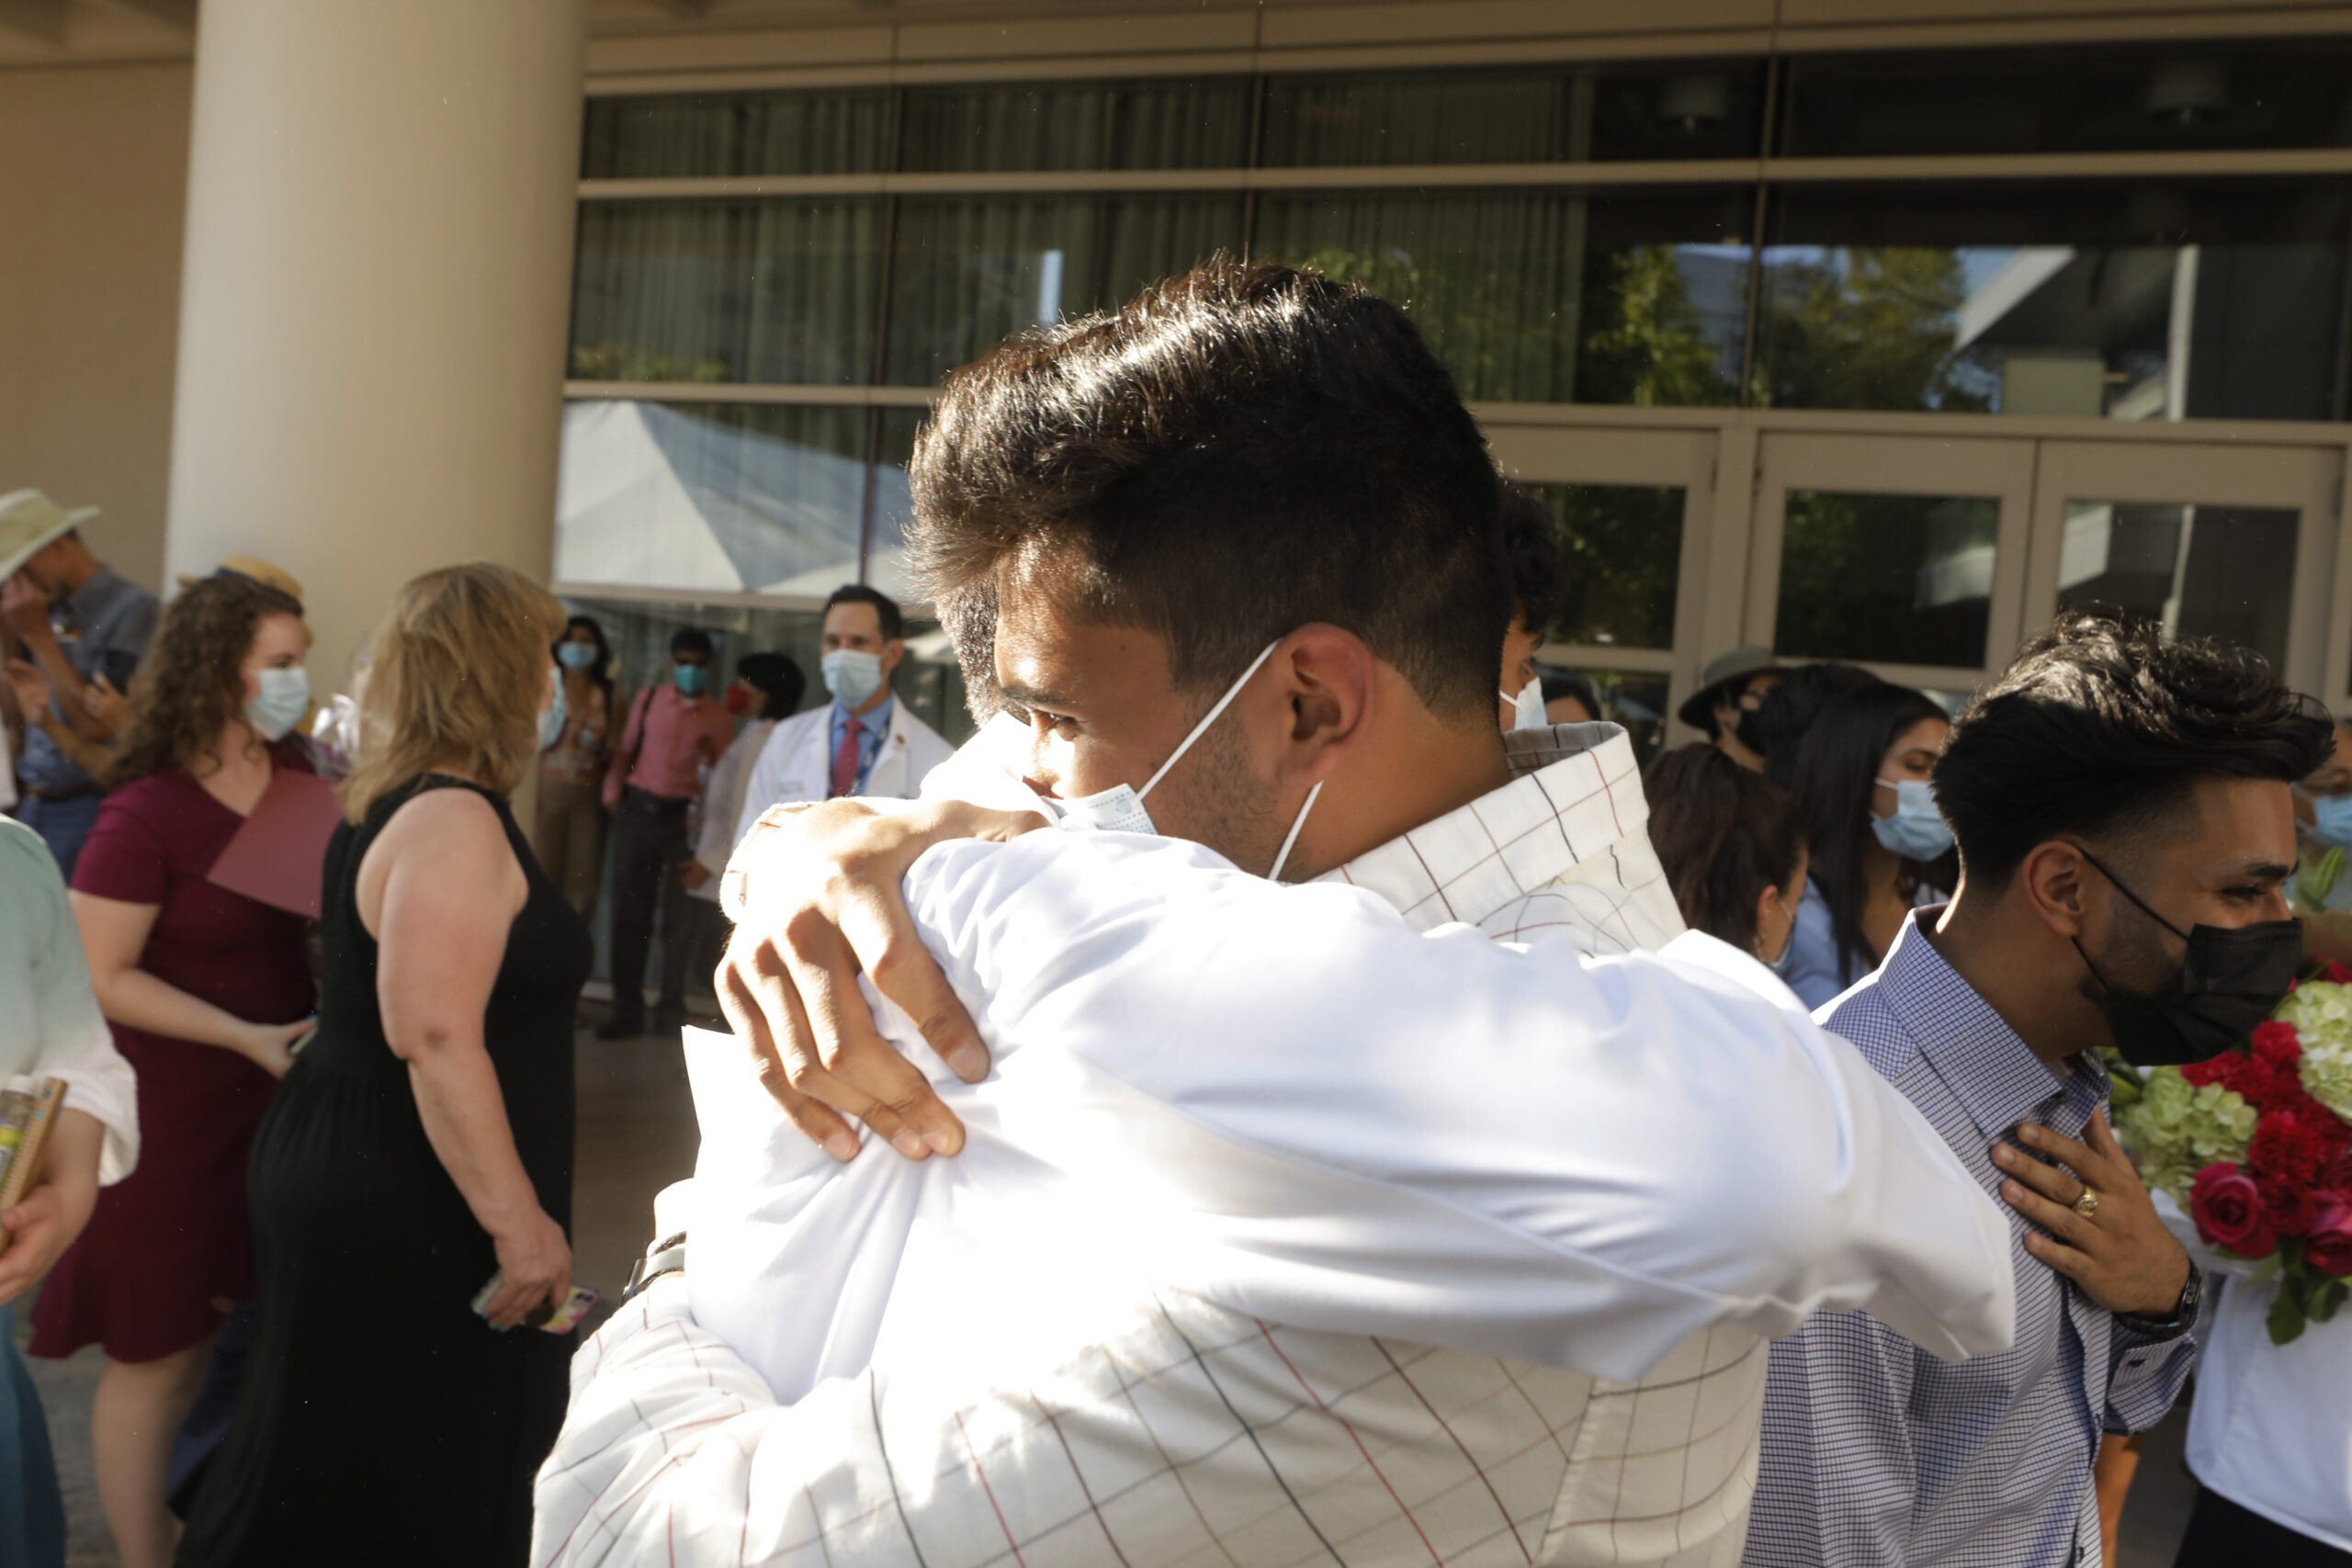 Students hug after the ceremony.